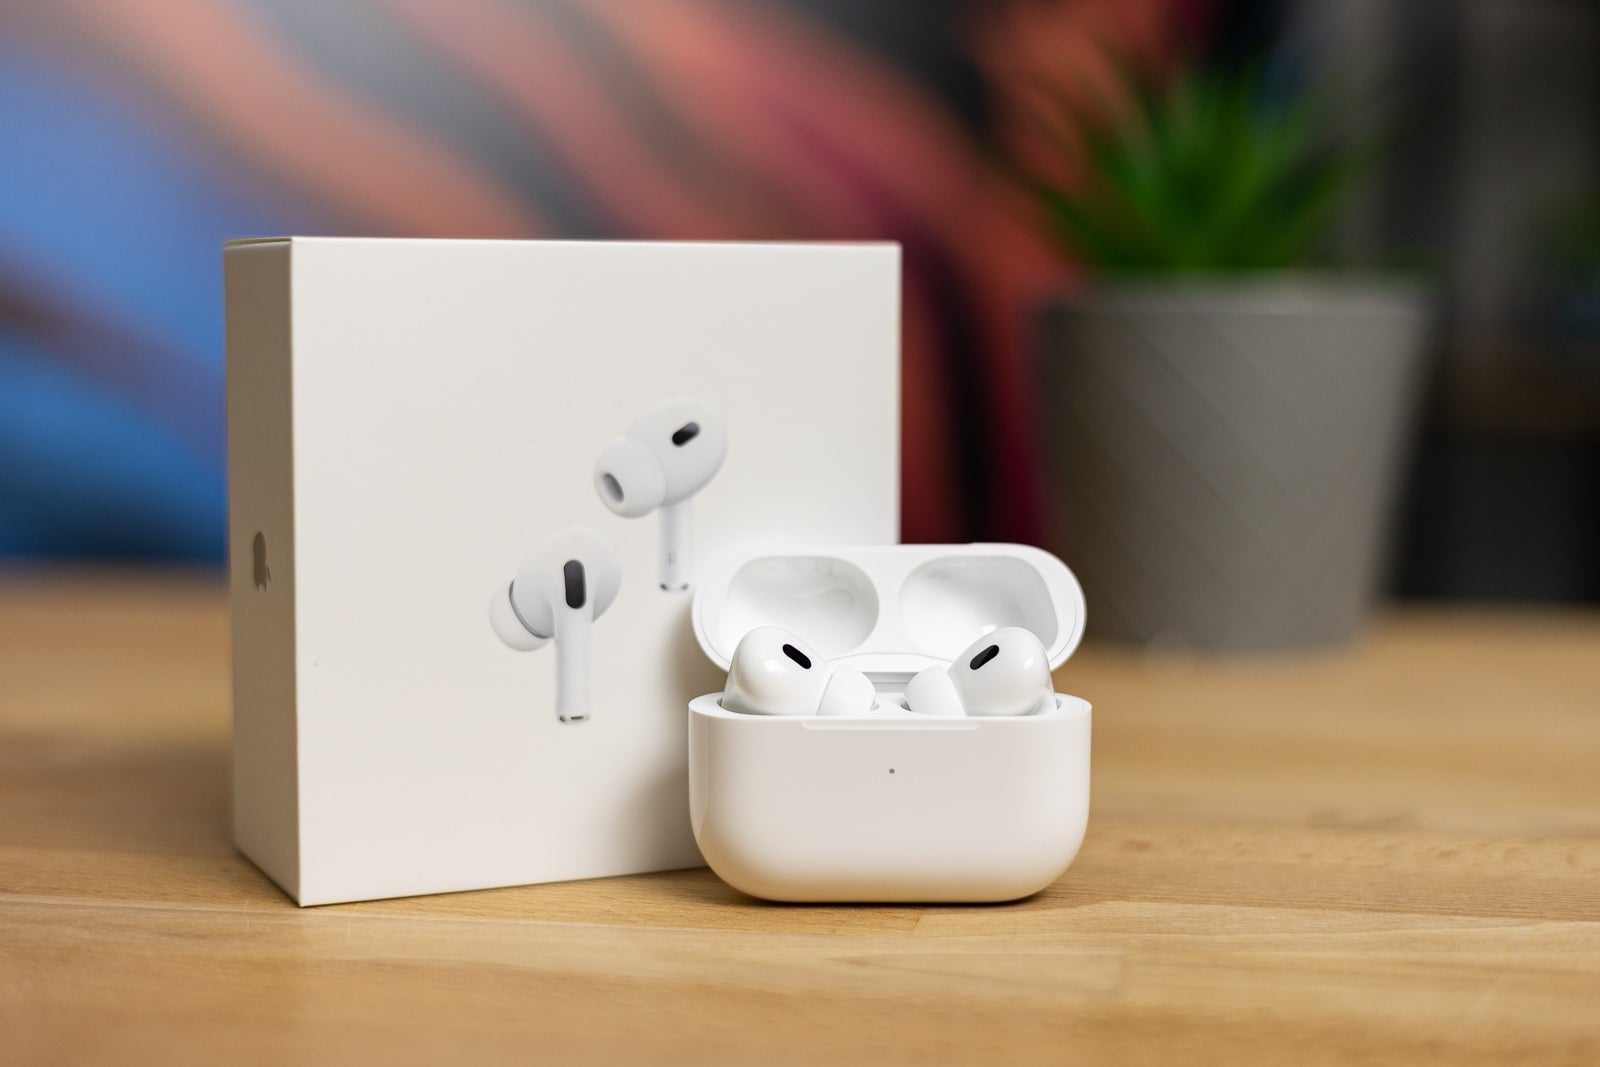 (Image Credit - PhoneArena) AirPods Pro 2 - AirPods Pro 2 review: Closer to perfection